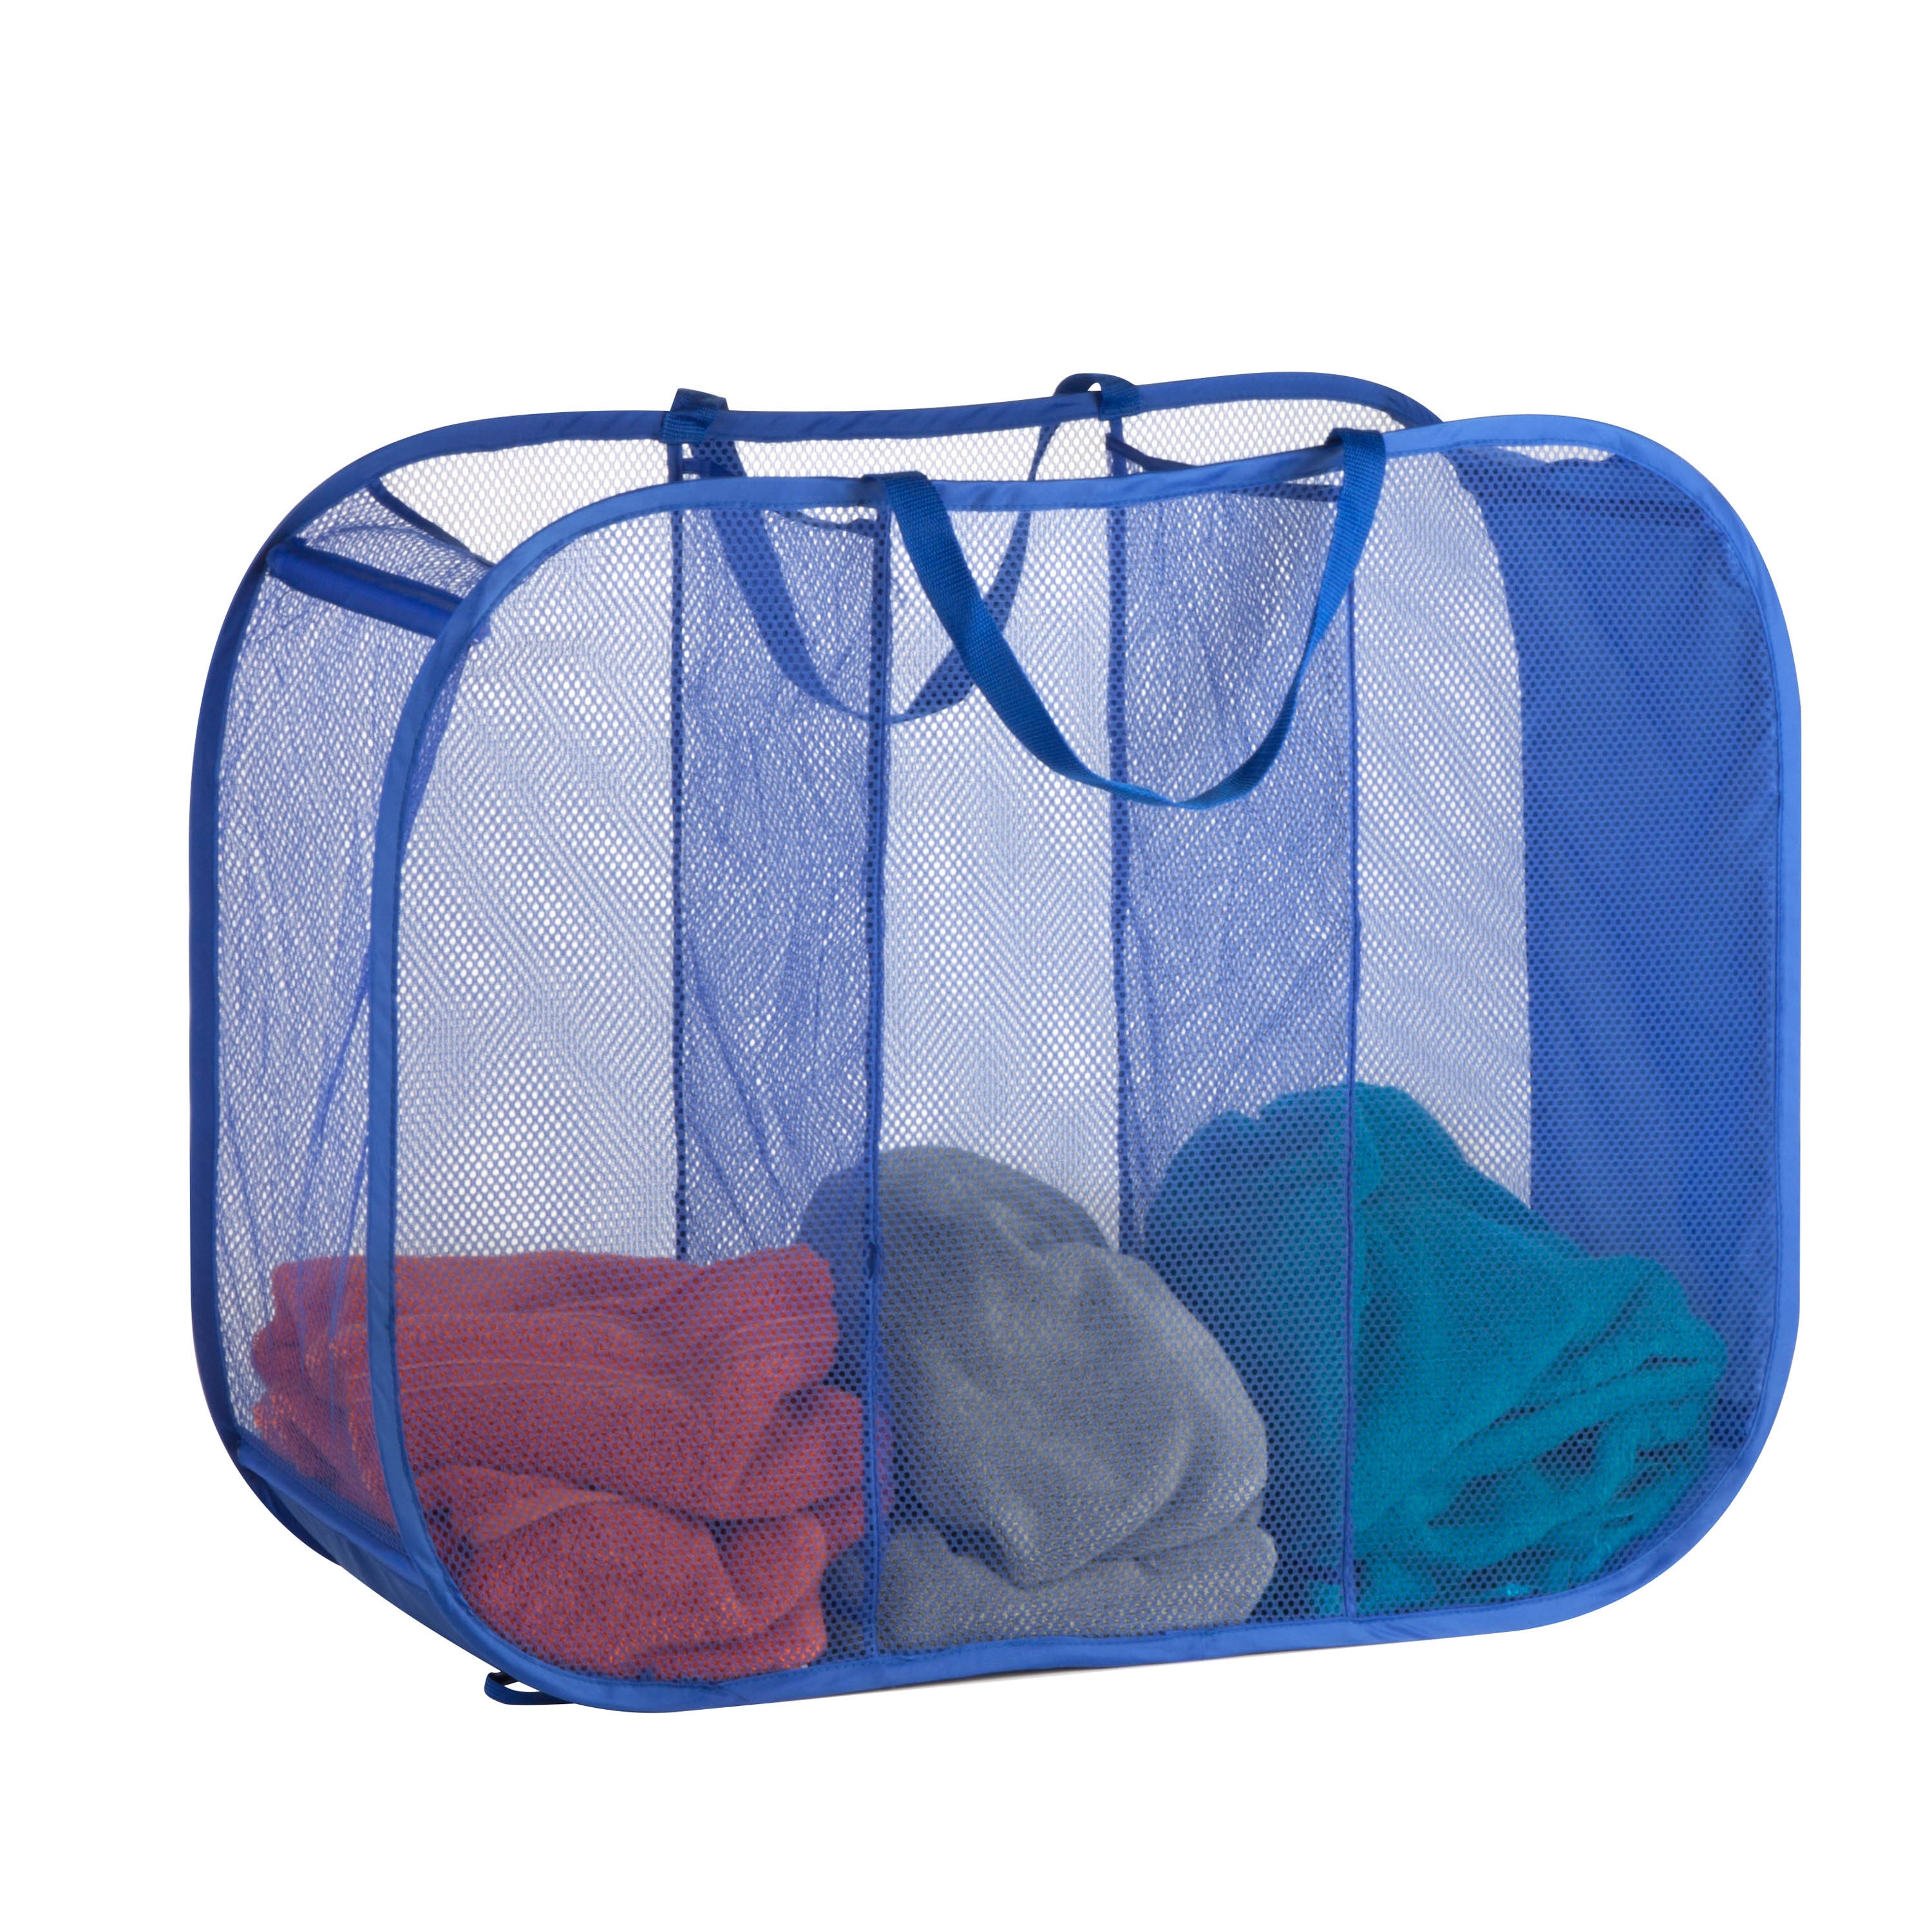 Honey Can Do Mesh Triple Laundry Sorter Basket with Handles, Blue - image 1 of 2